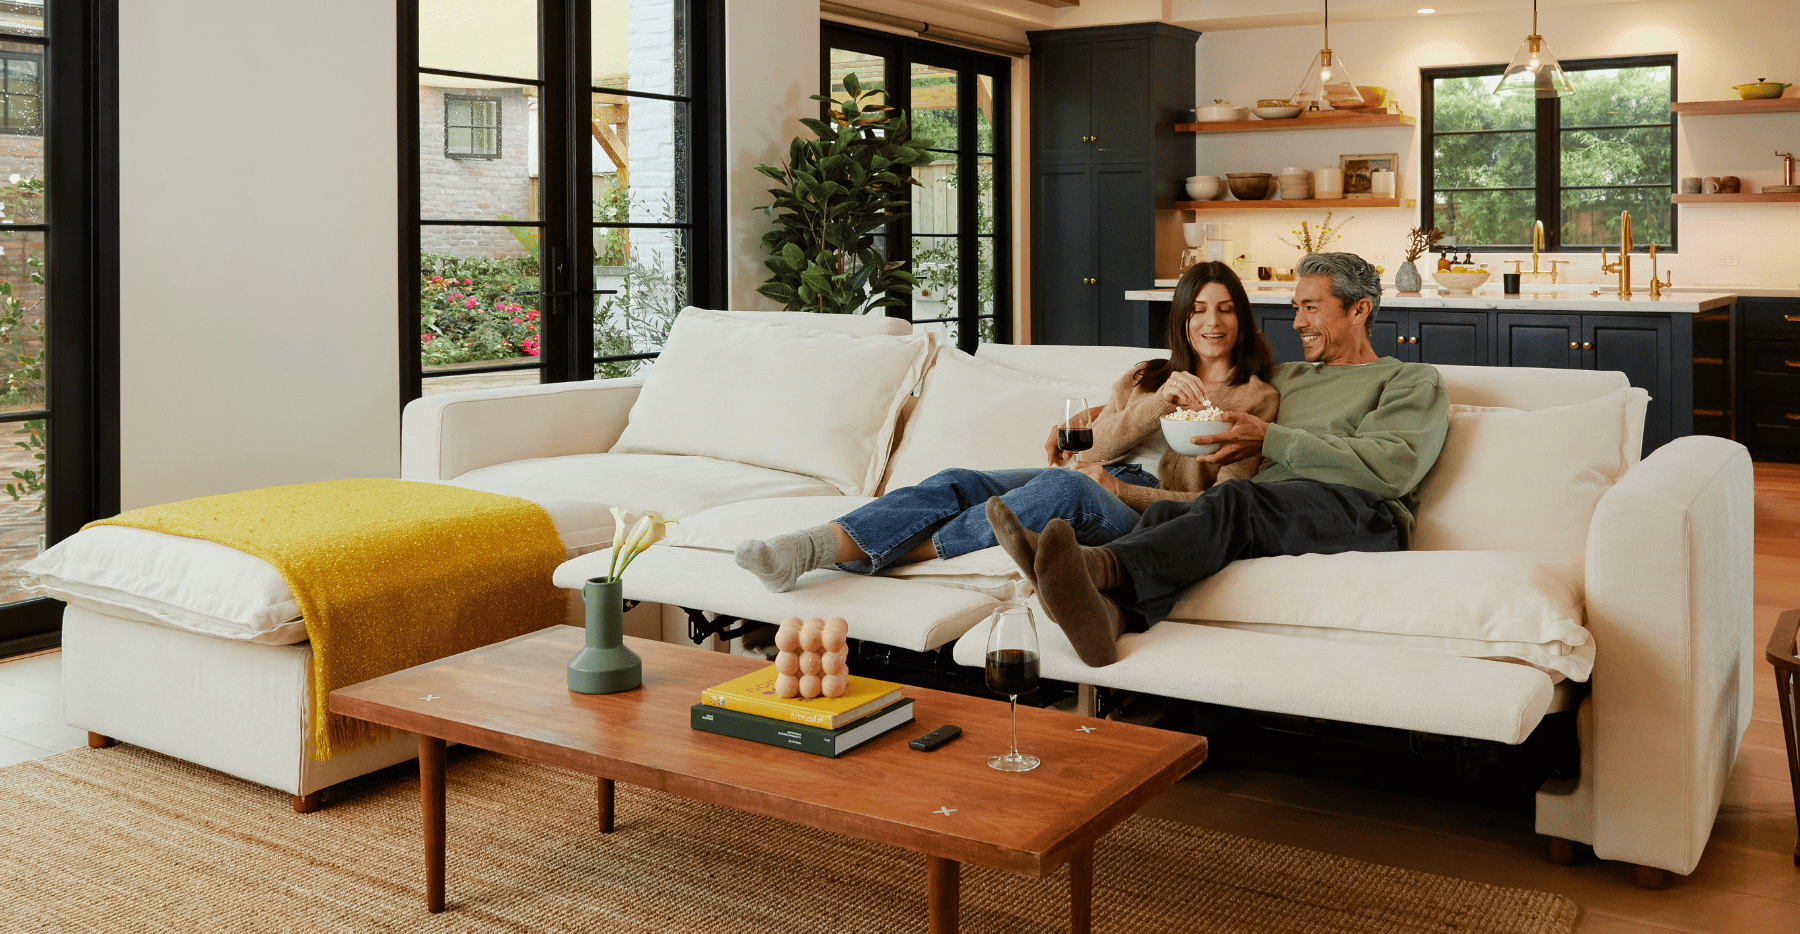 As you pick out furniture, consider how many friends or family members you want to host at once. That's where you'll see a clear distinction between chaises and sofas.